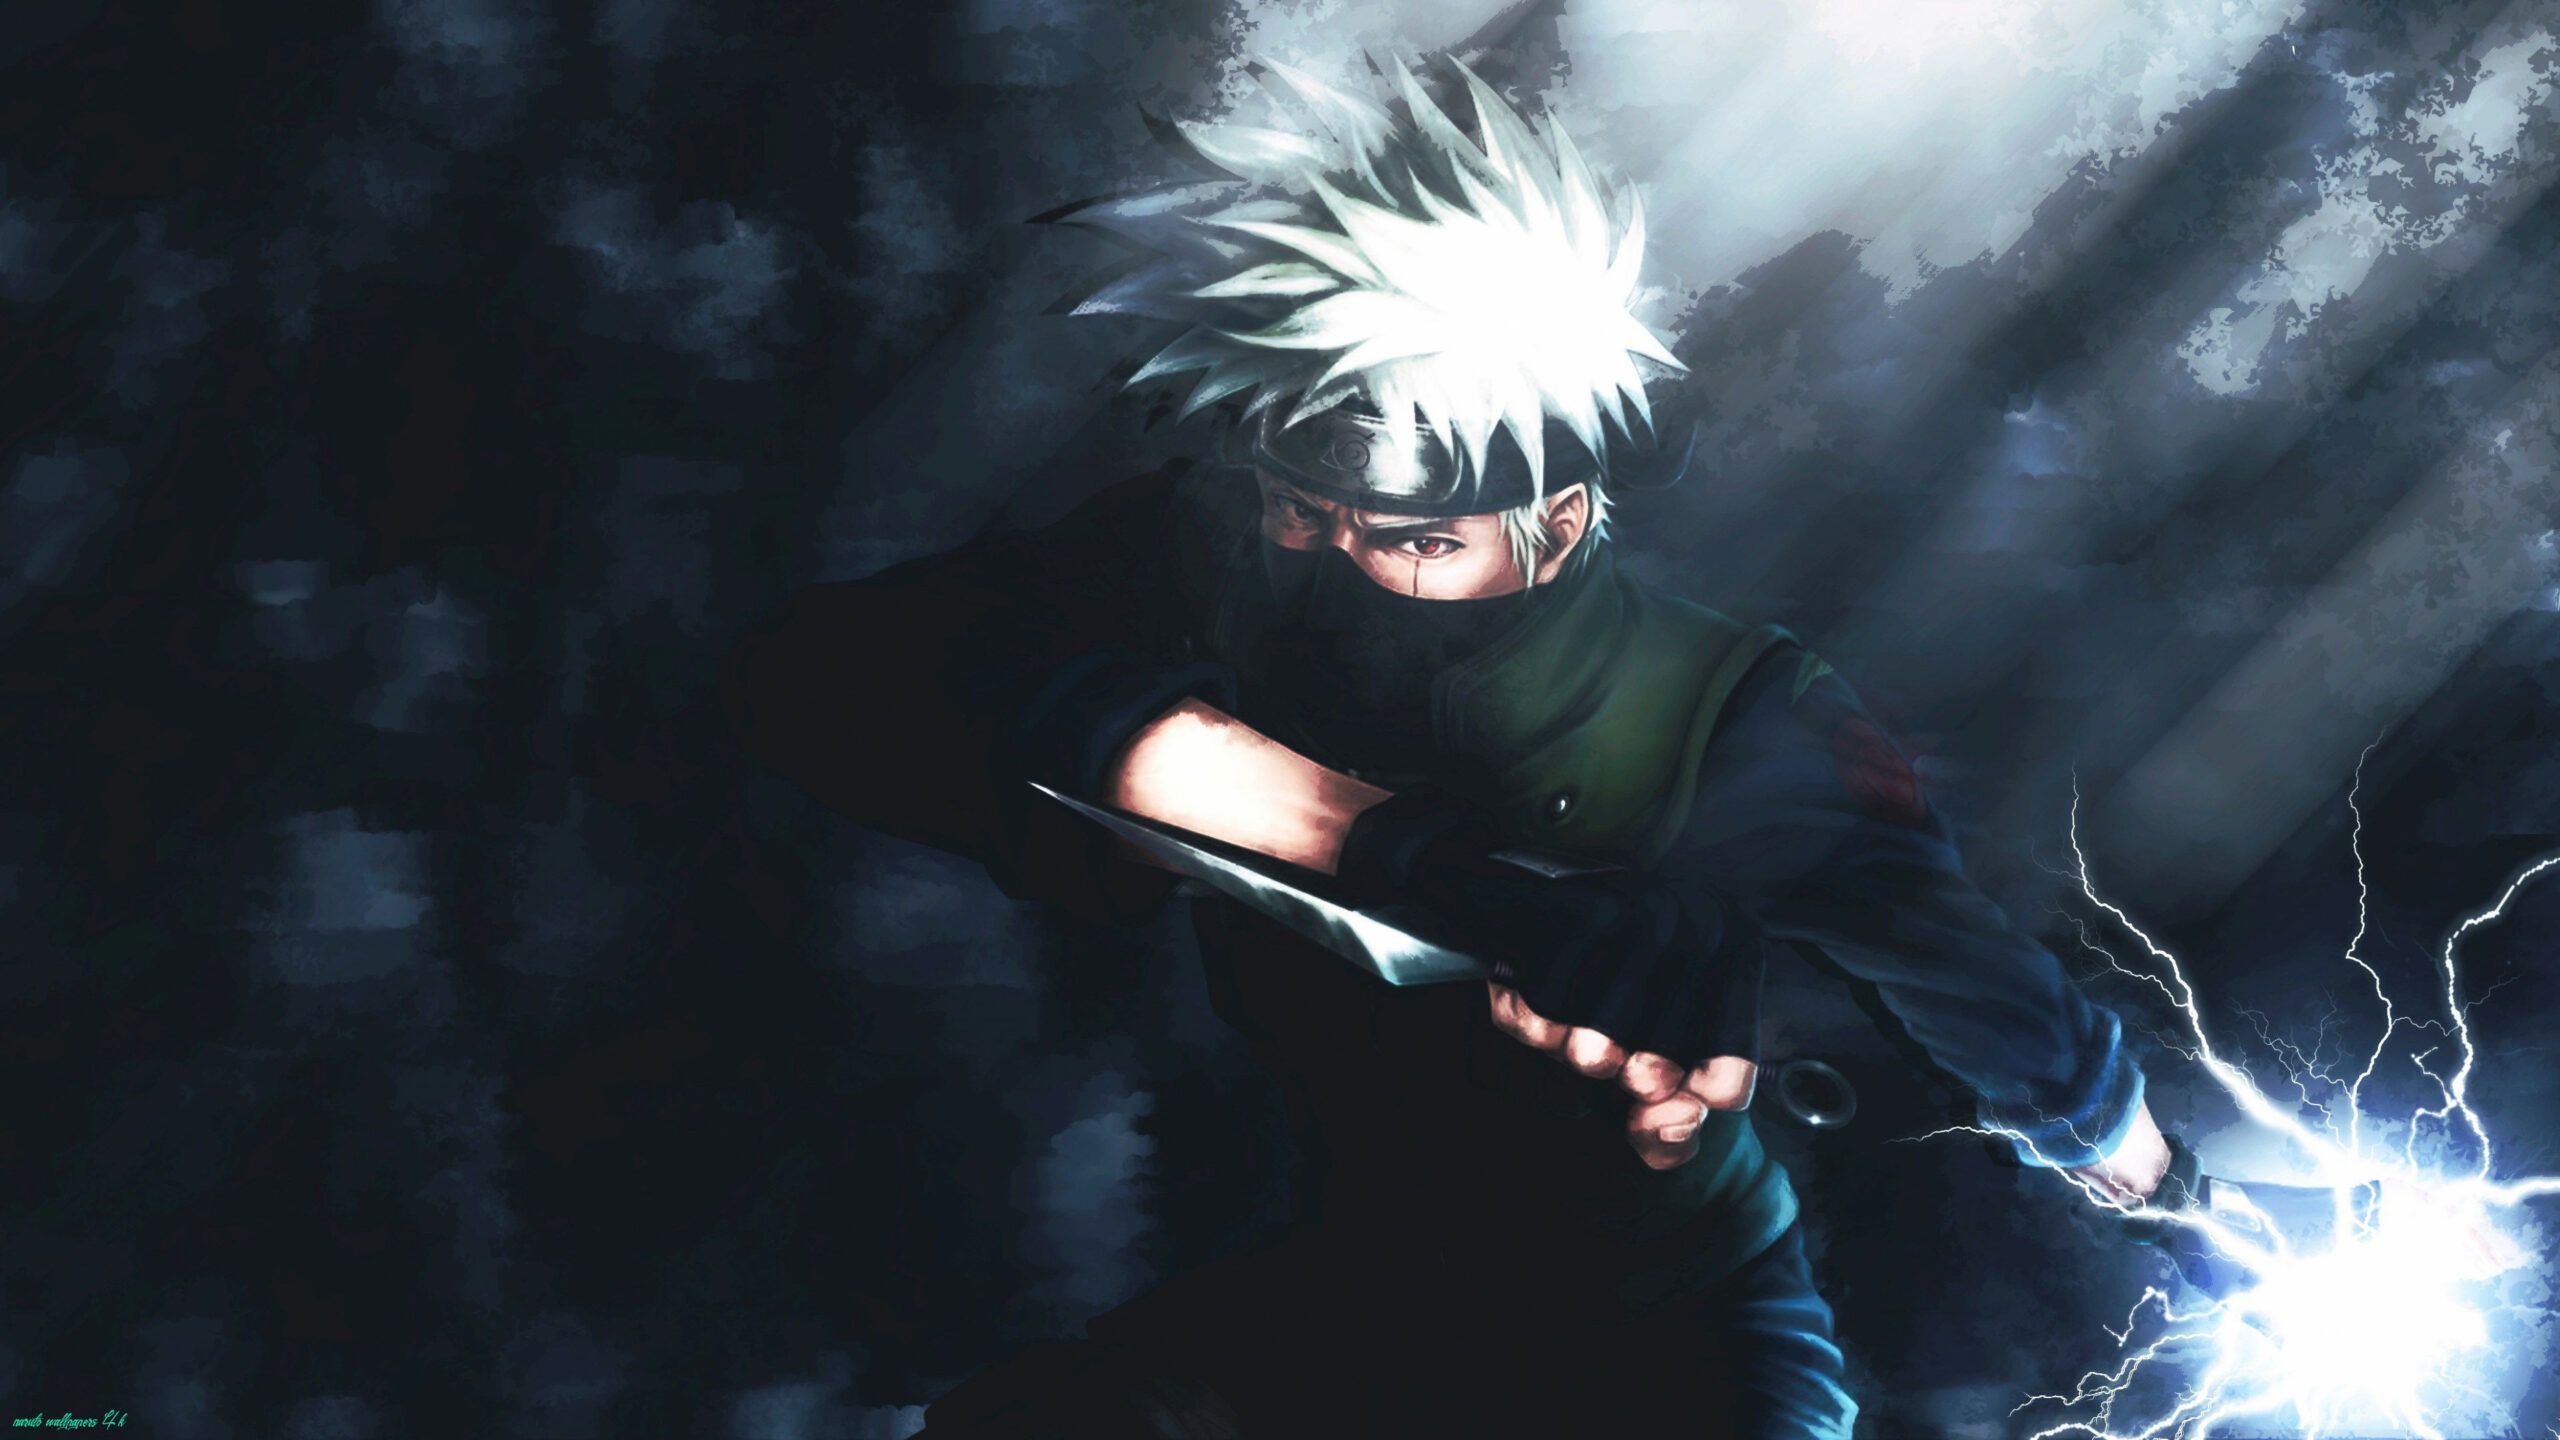 Doubts About Naruto Wallpaper 10k You Should Clarify. Naruto Wallpaper 10k. Naruto wallpaper, Best naruto wallpaper, Naruto and sasuke wallpaper